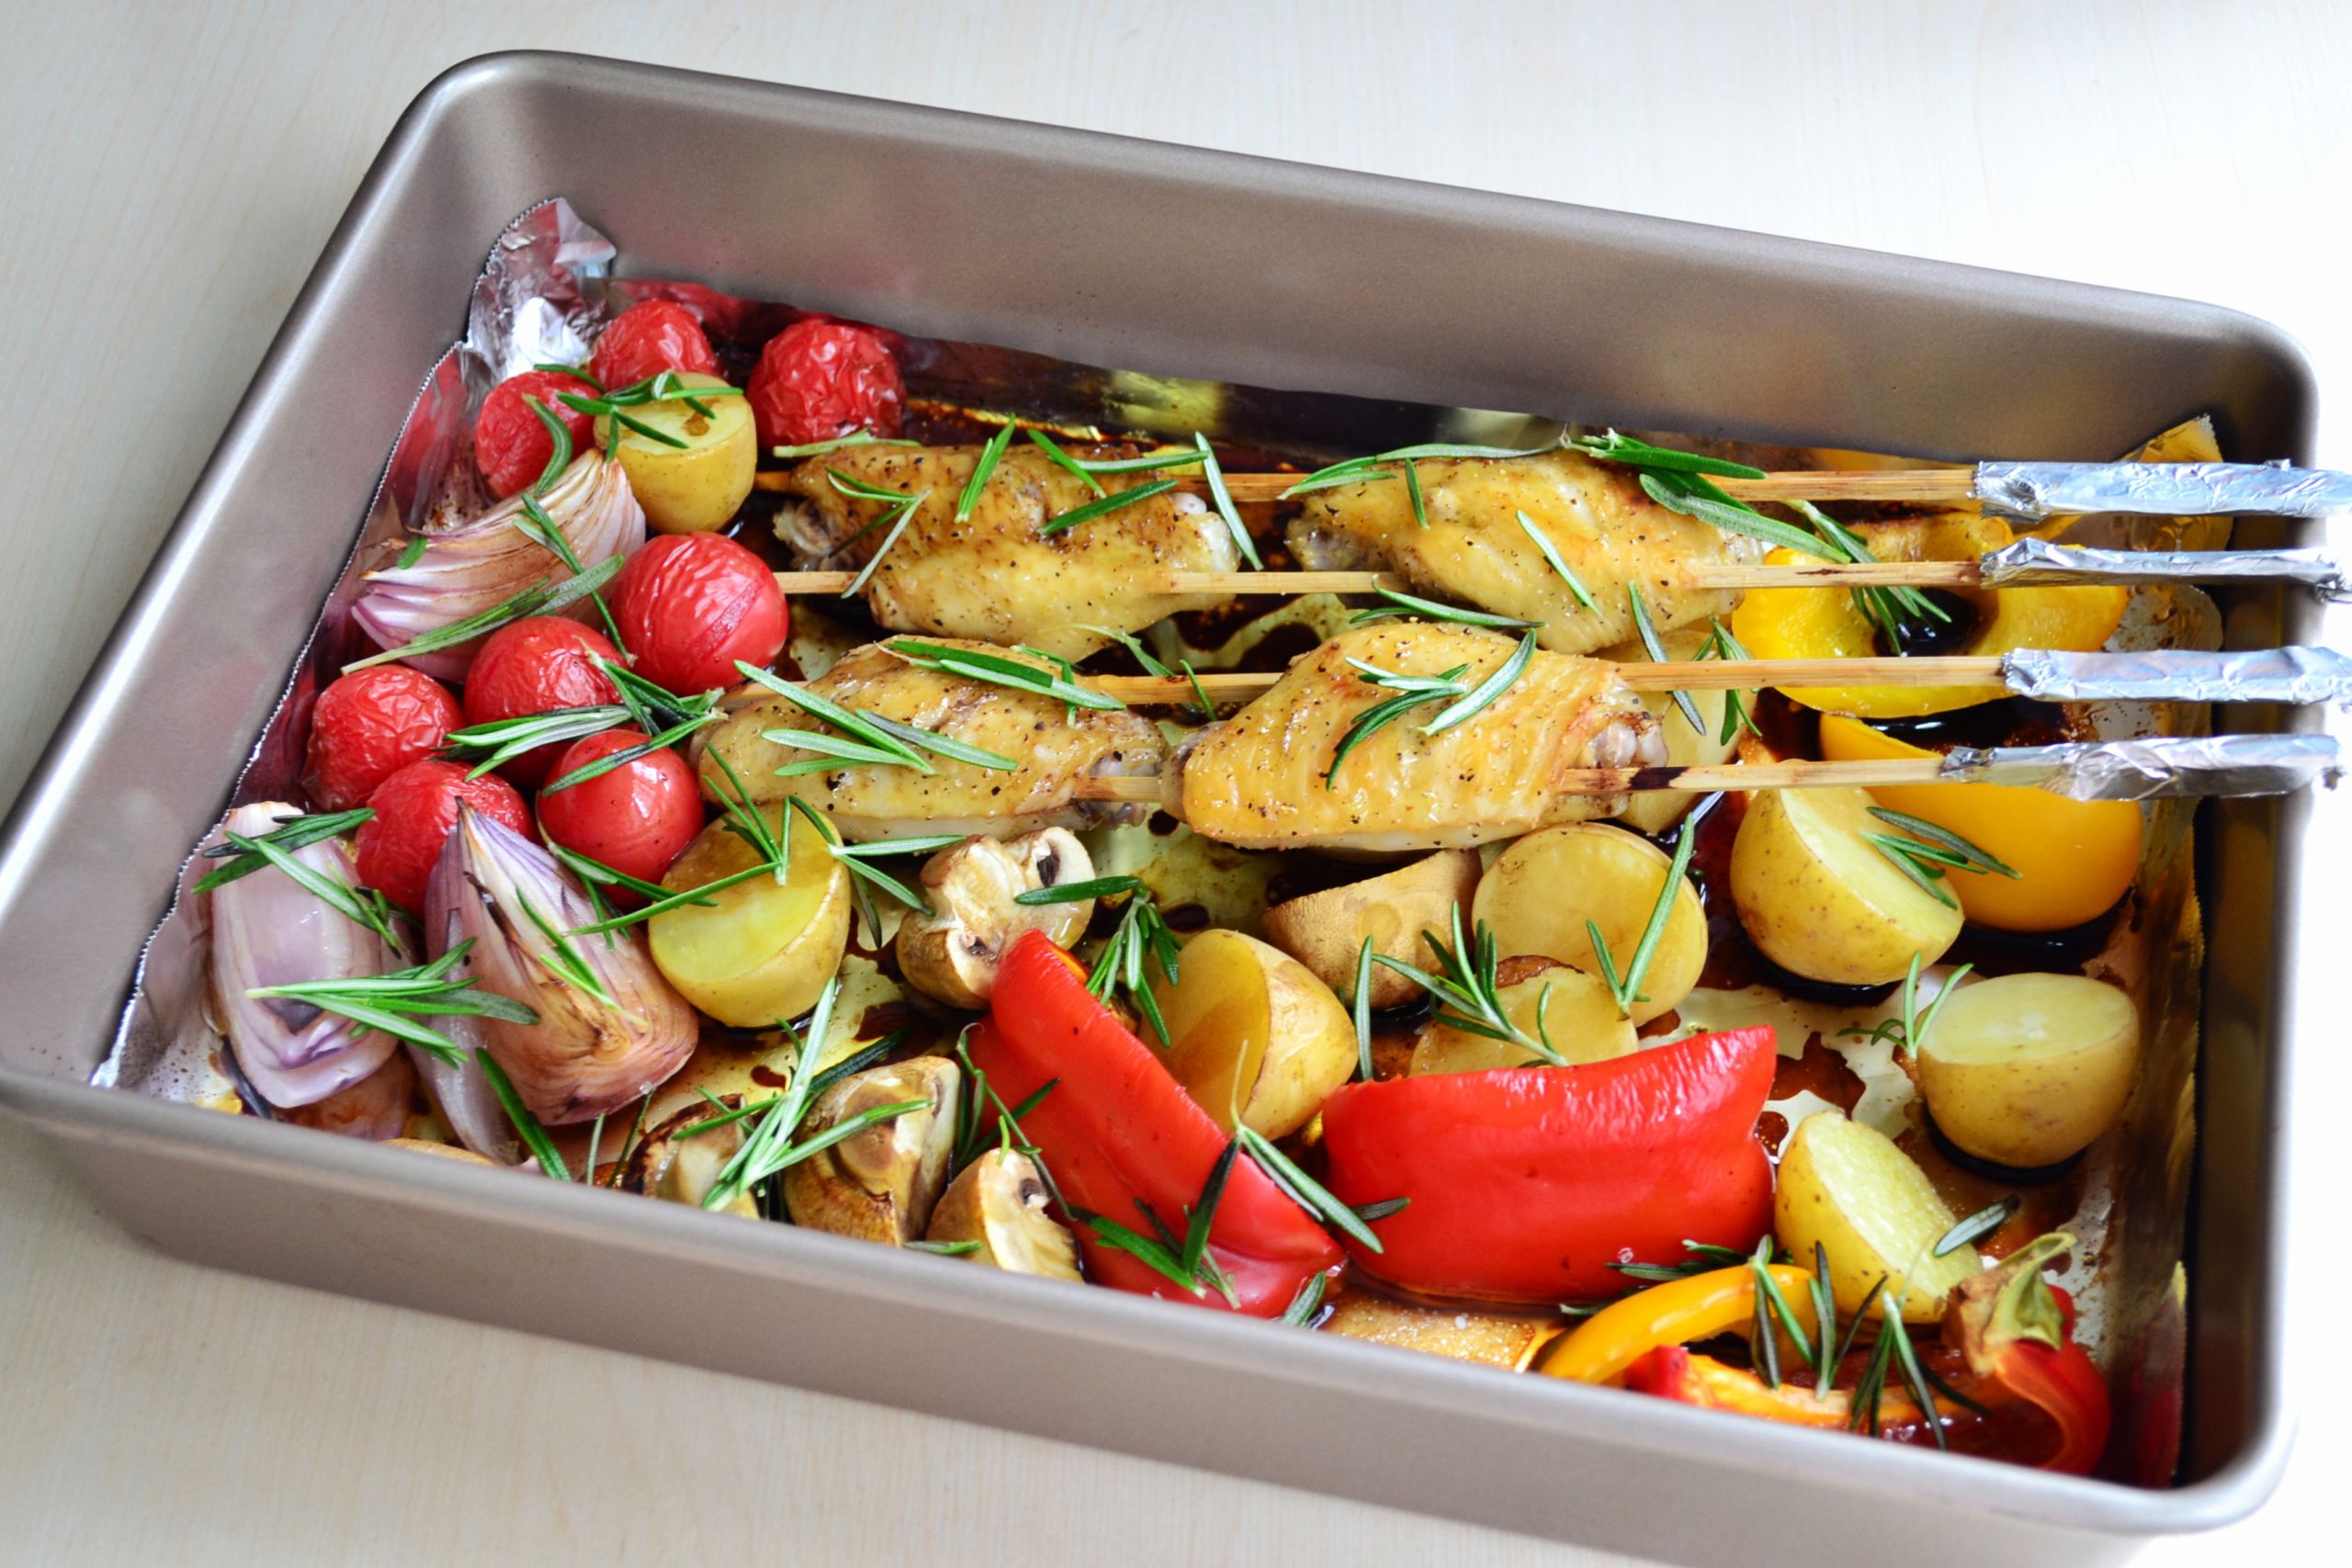 Roasted Vegetables With Balsamic Glaze
 The Best Roasted Ve ables with Balsamic Glaze